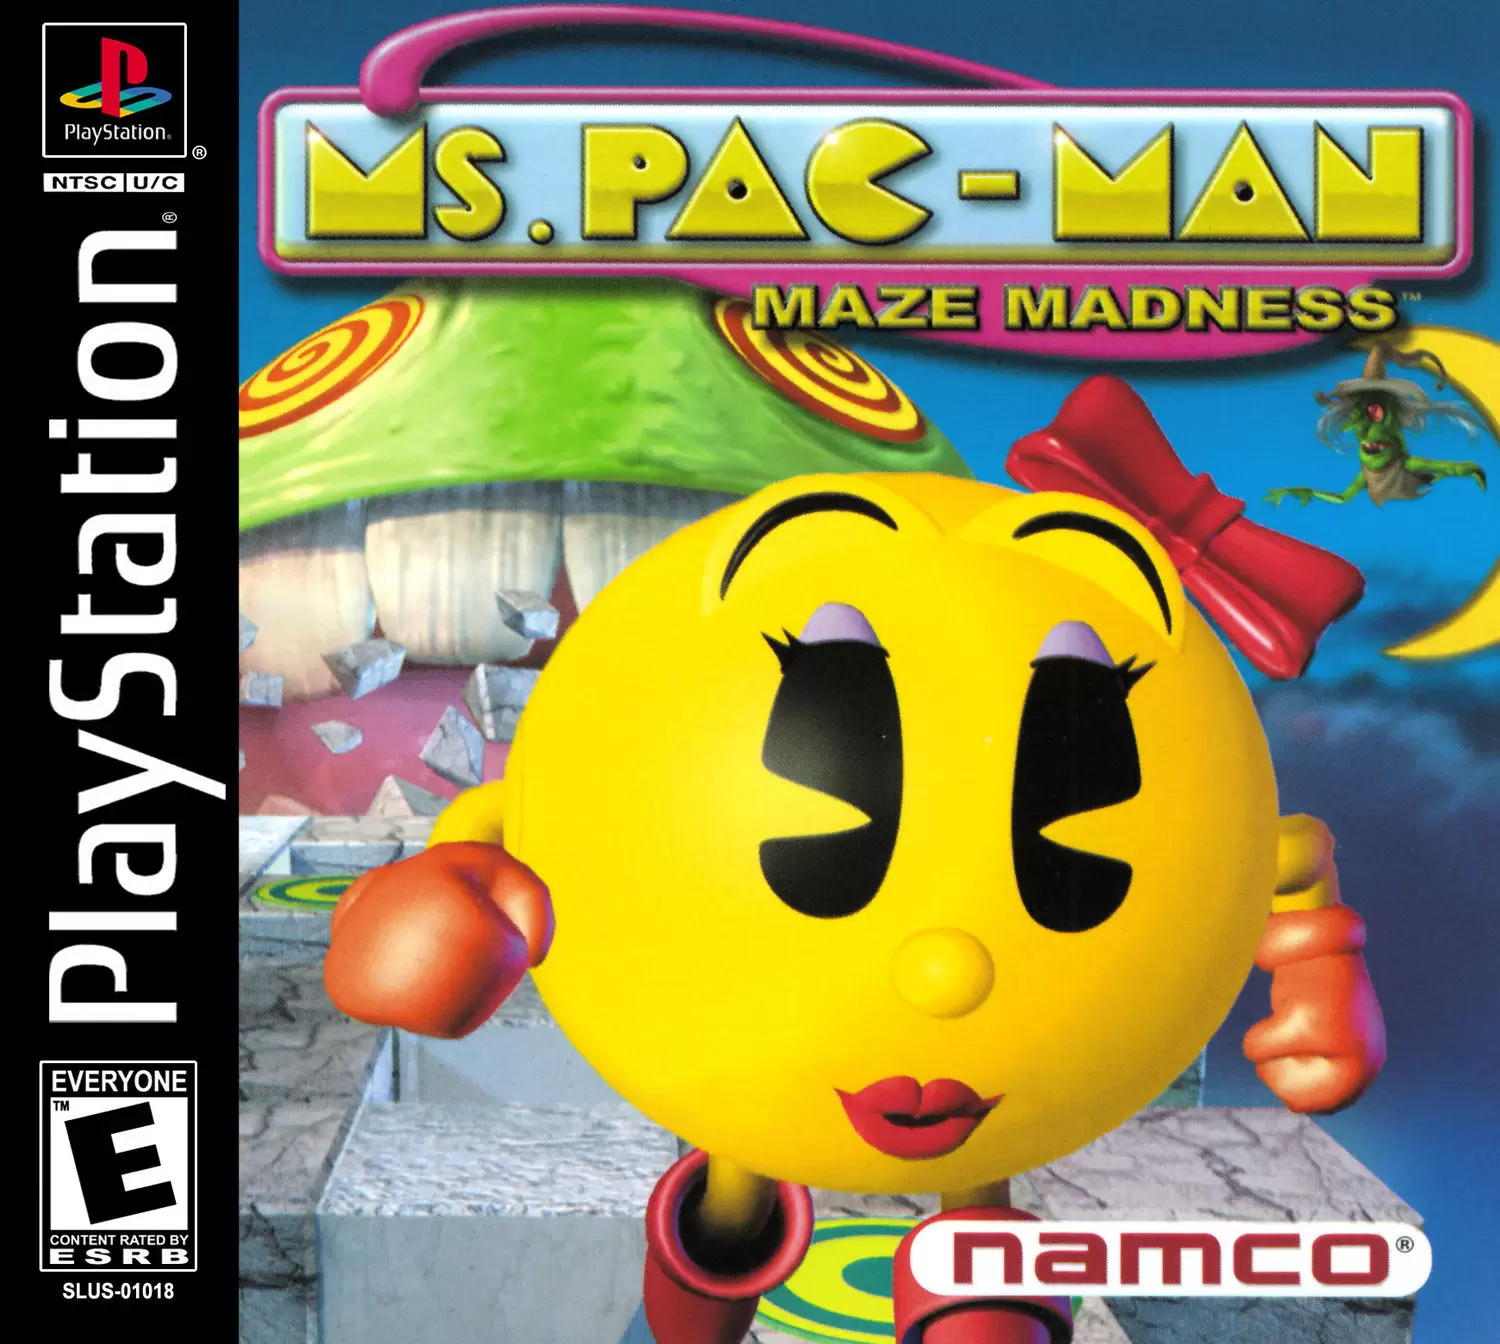 Playstation games - Ms. Pac-Man Maze Madness